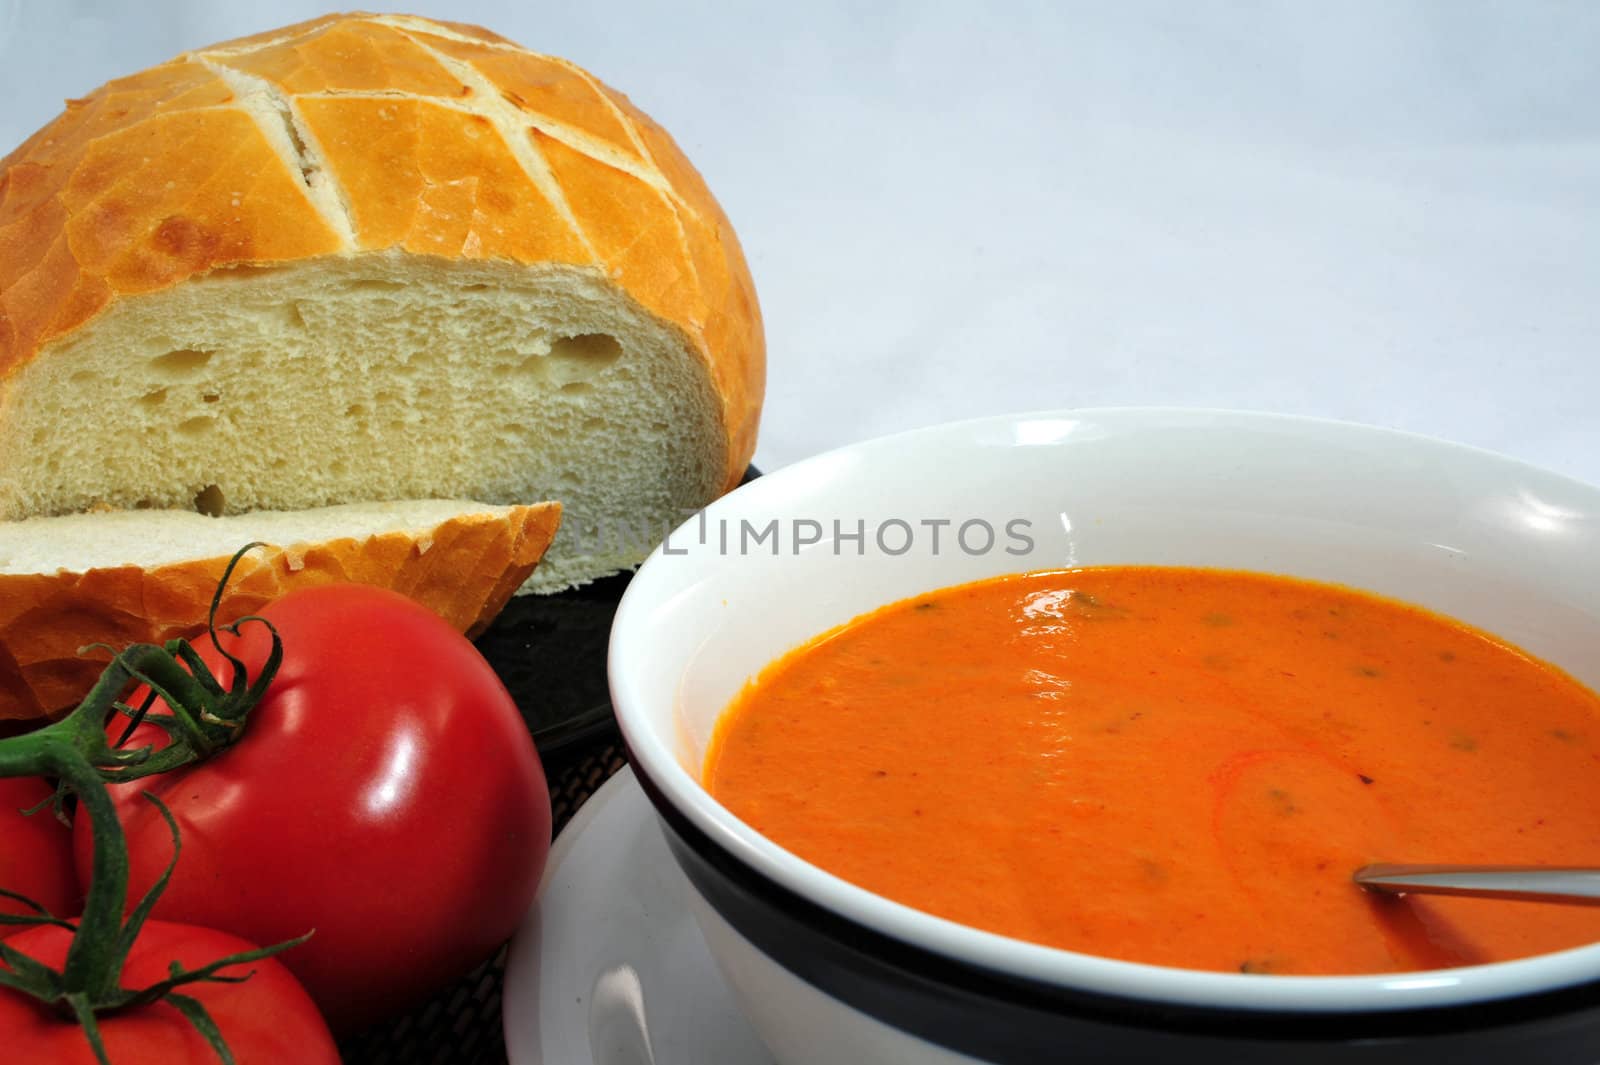 Hot Tomato soup in a bowl with bread on the side